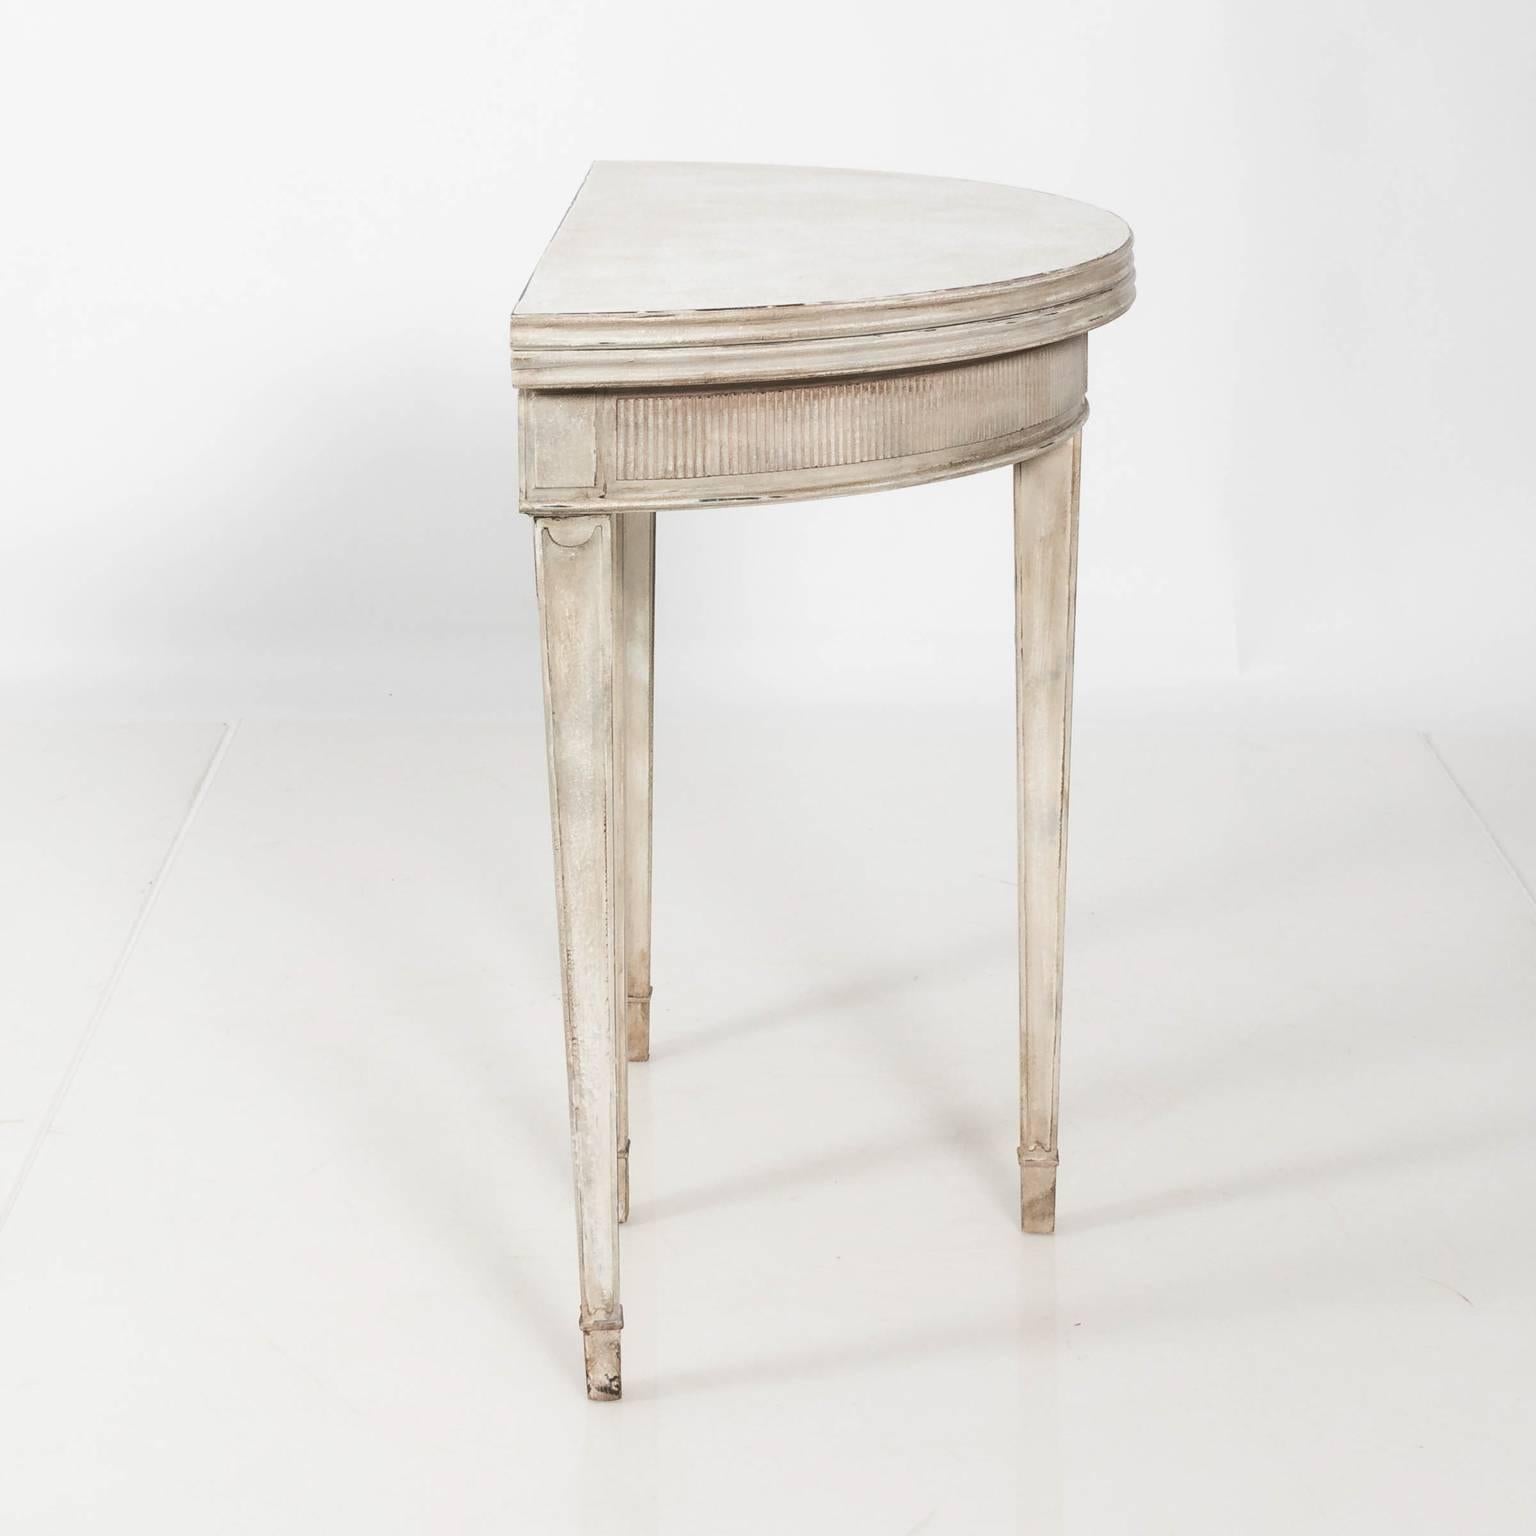 Wood Gustavian Style Grey Painted Flip Top Demilune Table